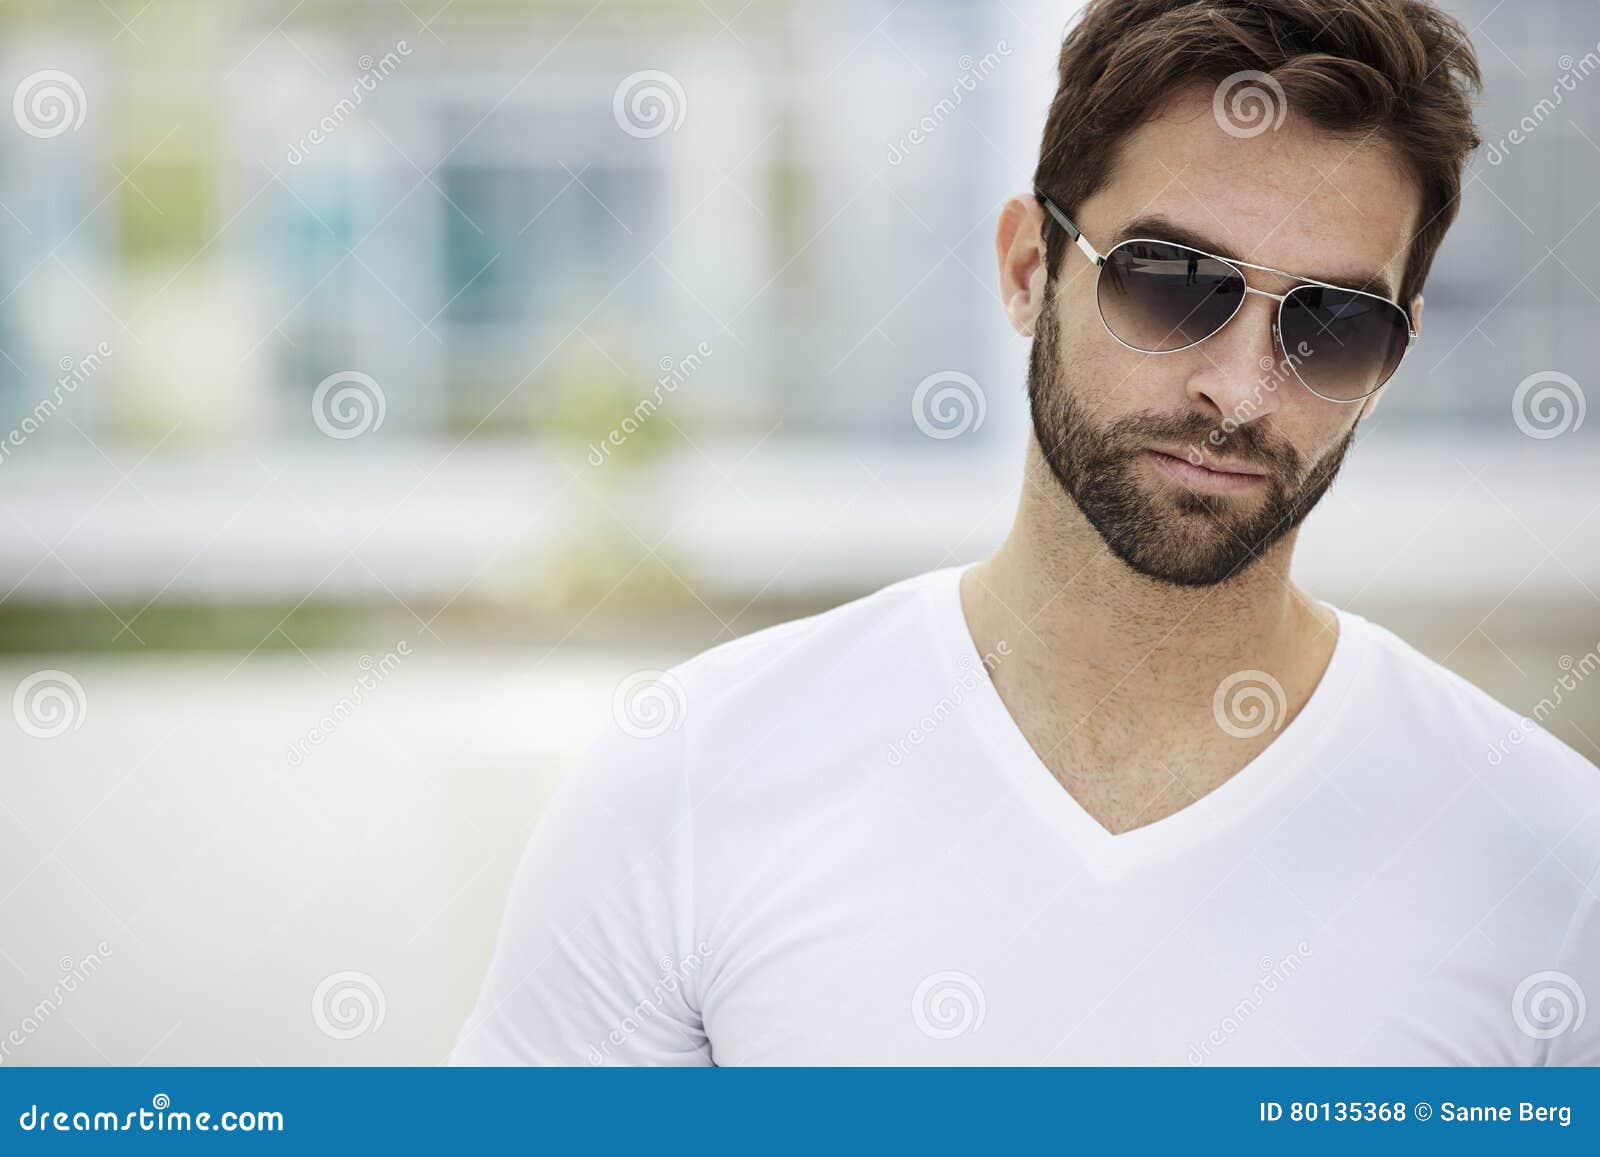 Beard and sunglasses man stock photo. Image of view, clothing